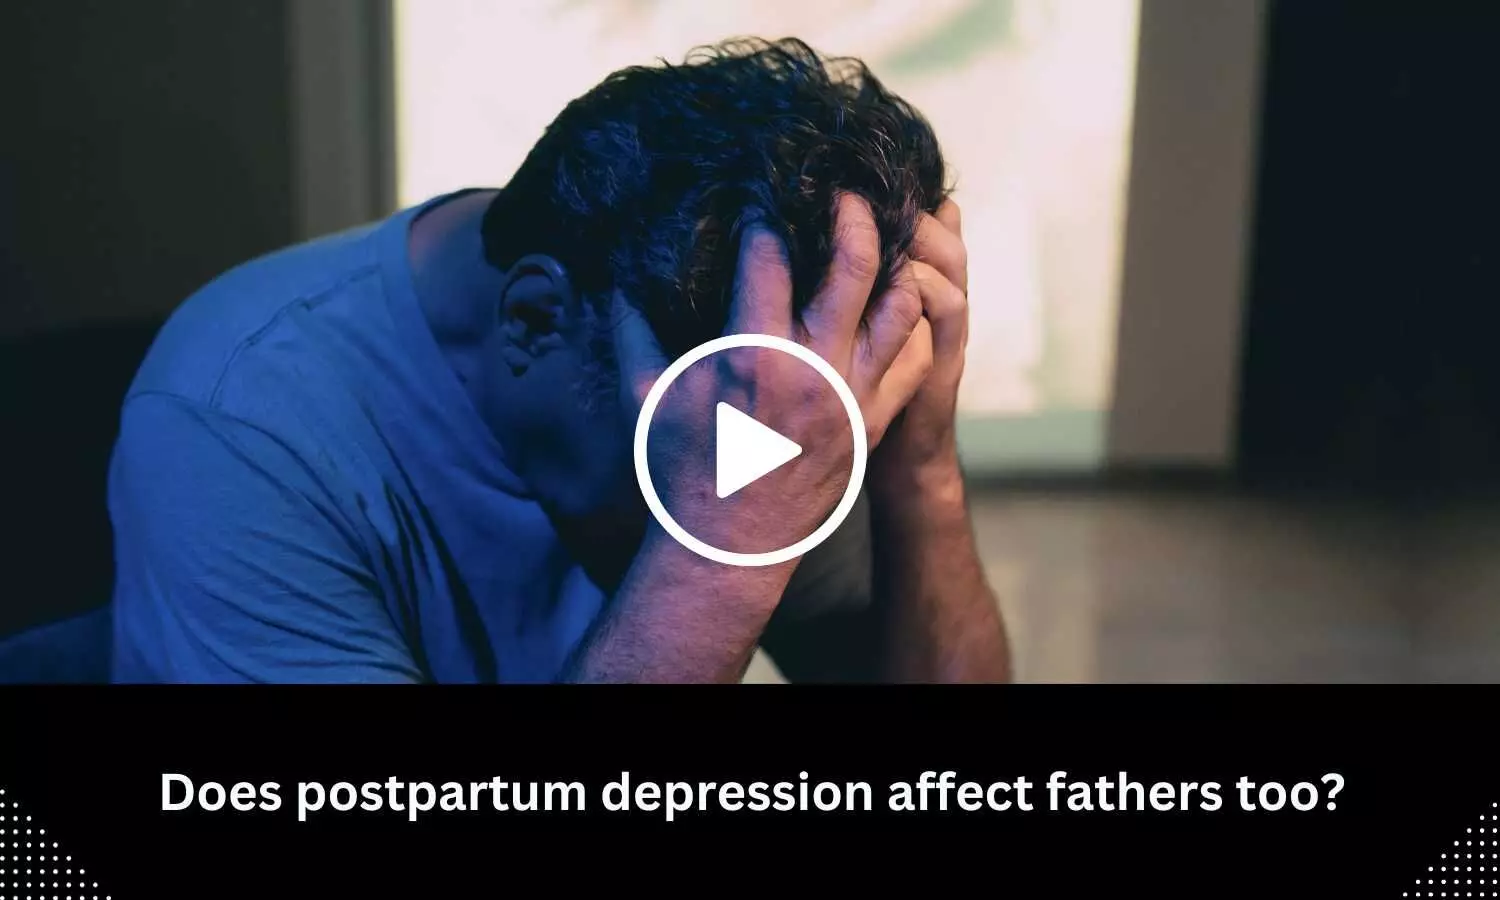 Do Fathers suffer from Postpartum Depression? YES, Says New Study